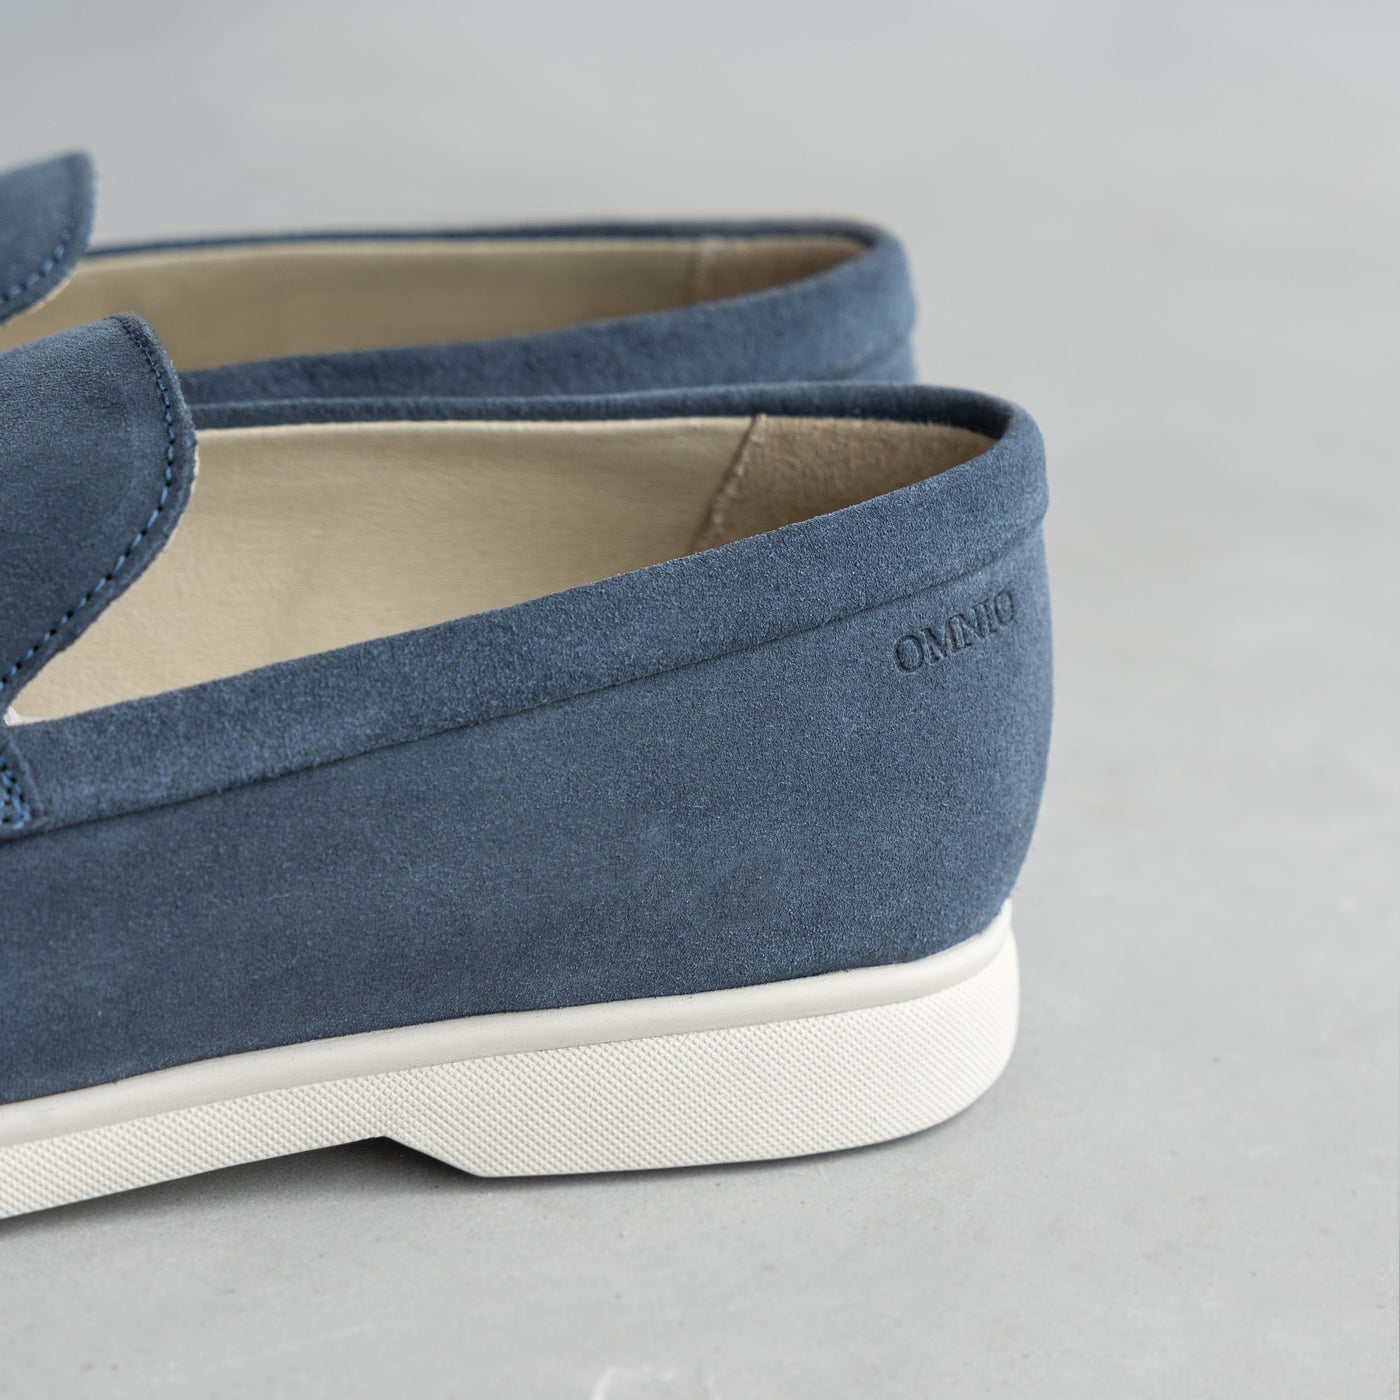 ACE LOAFER Jeans Suede